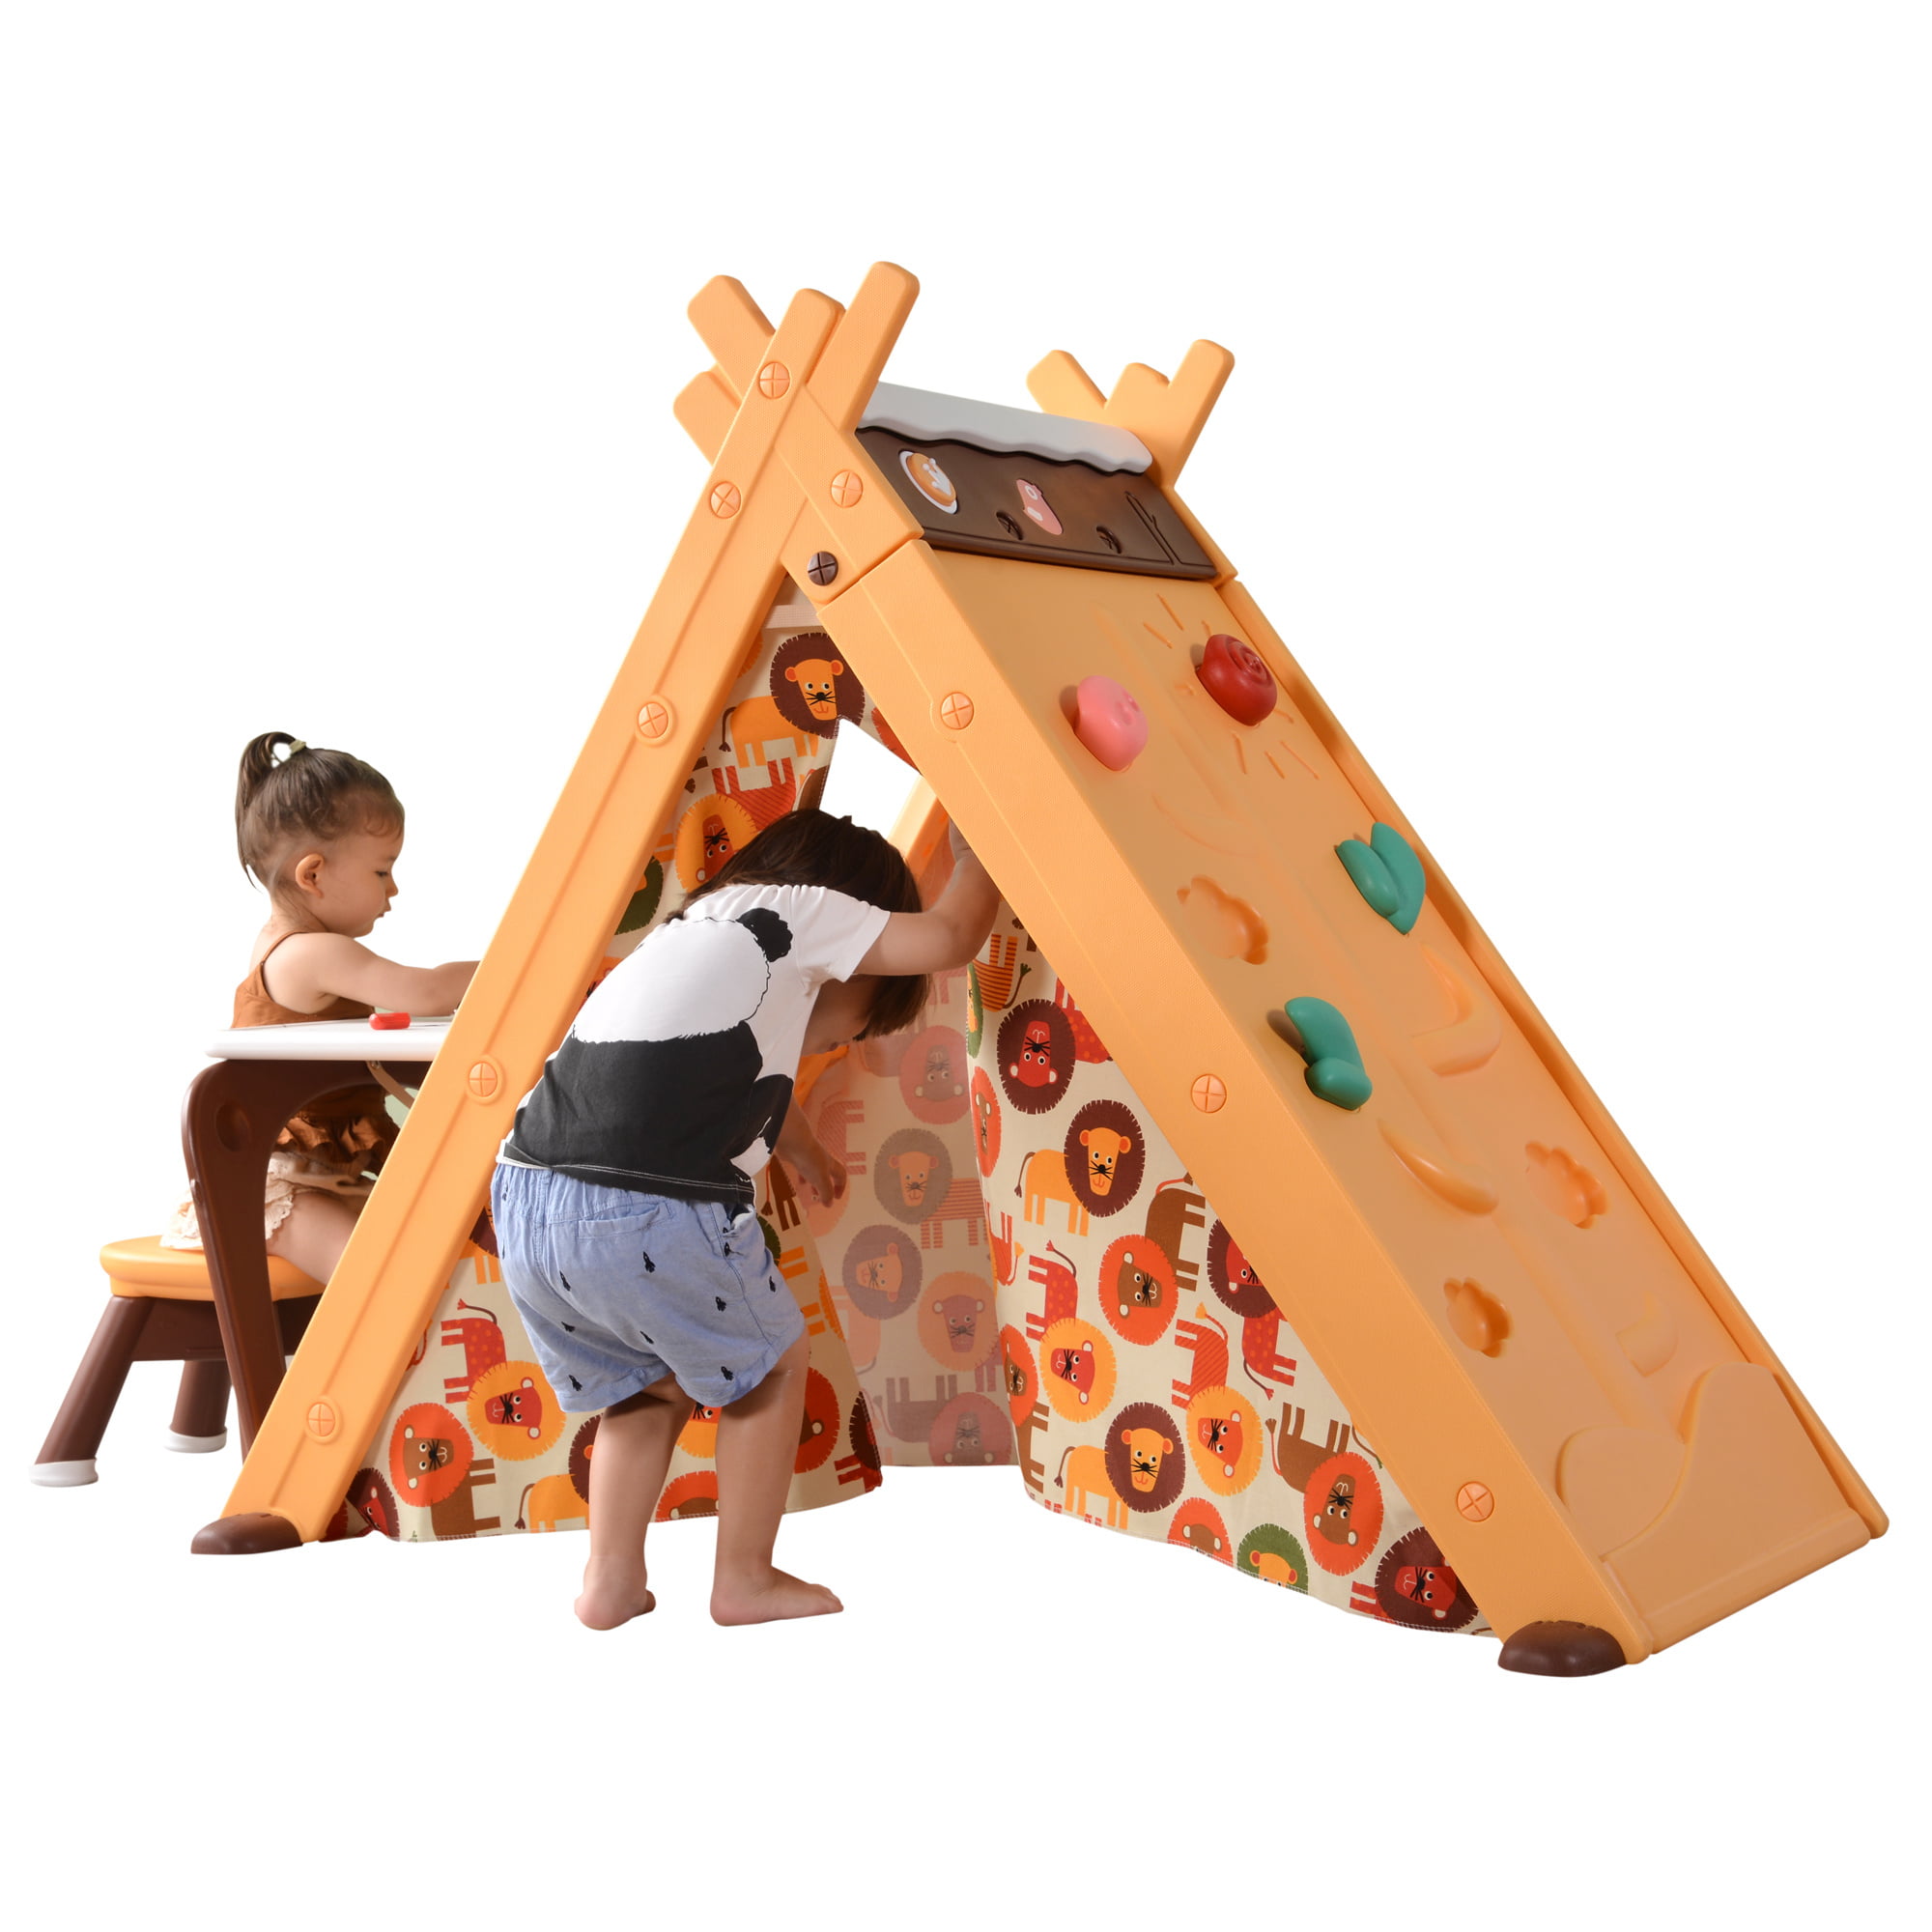 Kids Foldable Indian Play Tent Orange Teepee Playhouse Tent for Boys & Girls 